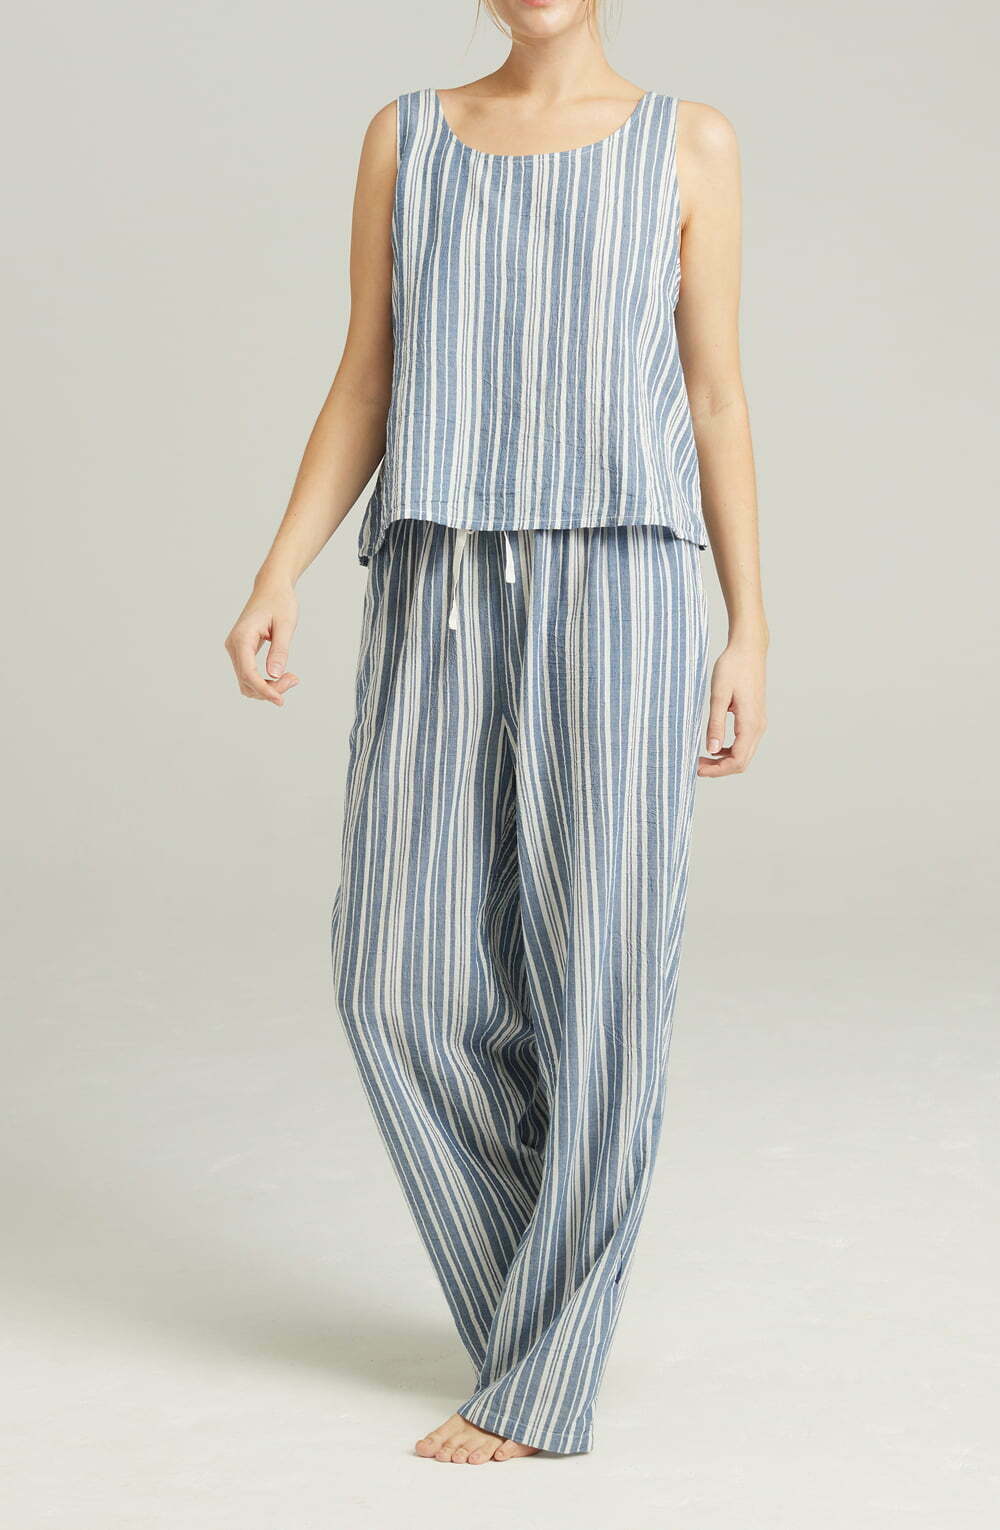 Striped cotton pajama set with relaxed tank top and wide-leg pants, perfect for comfortable lounging.